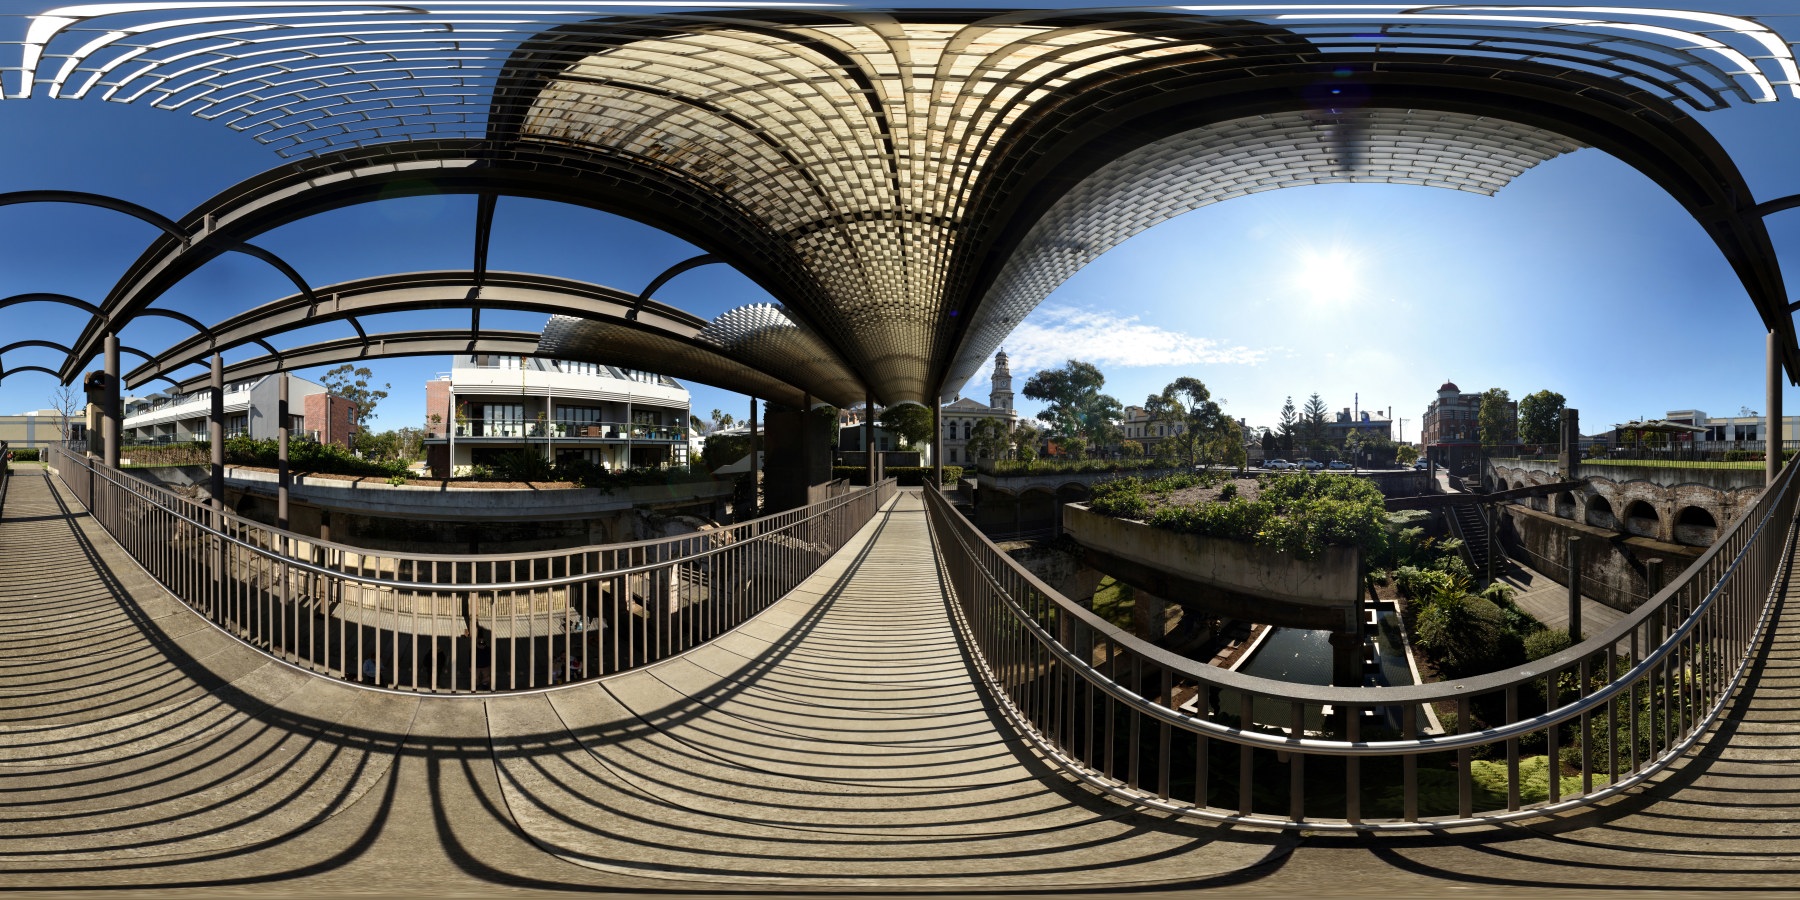 Lower level, Paddington Reservoir Gardens Sydney. 360VR Panorama Architectural and Travel photography by Kent Johnson.